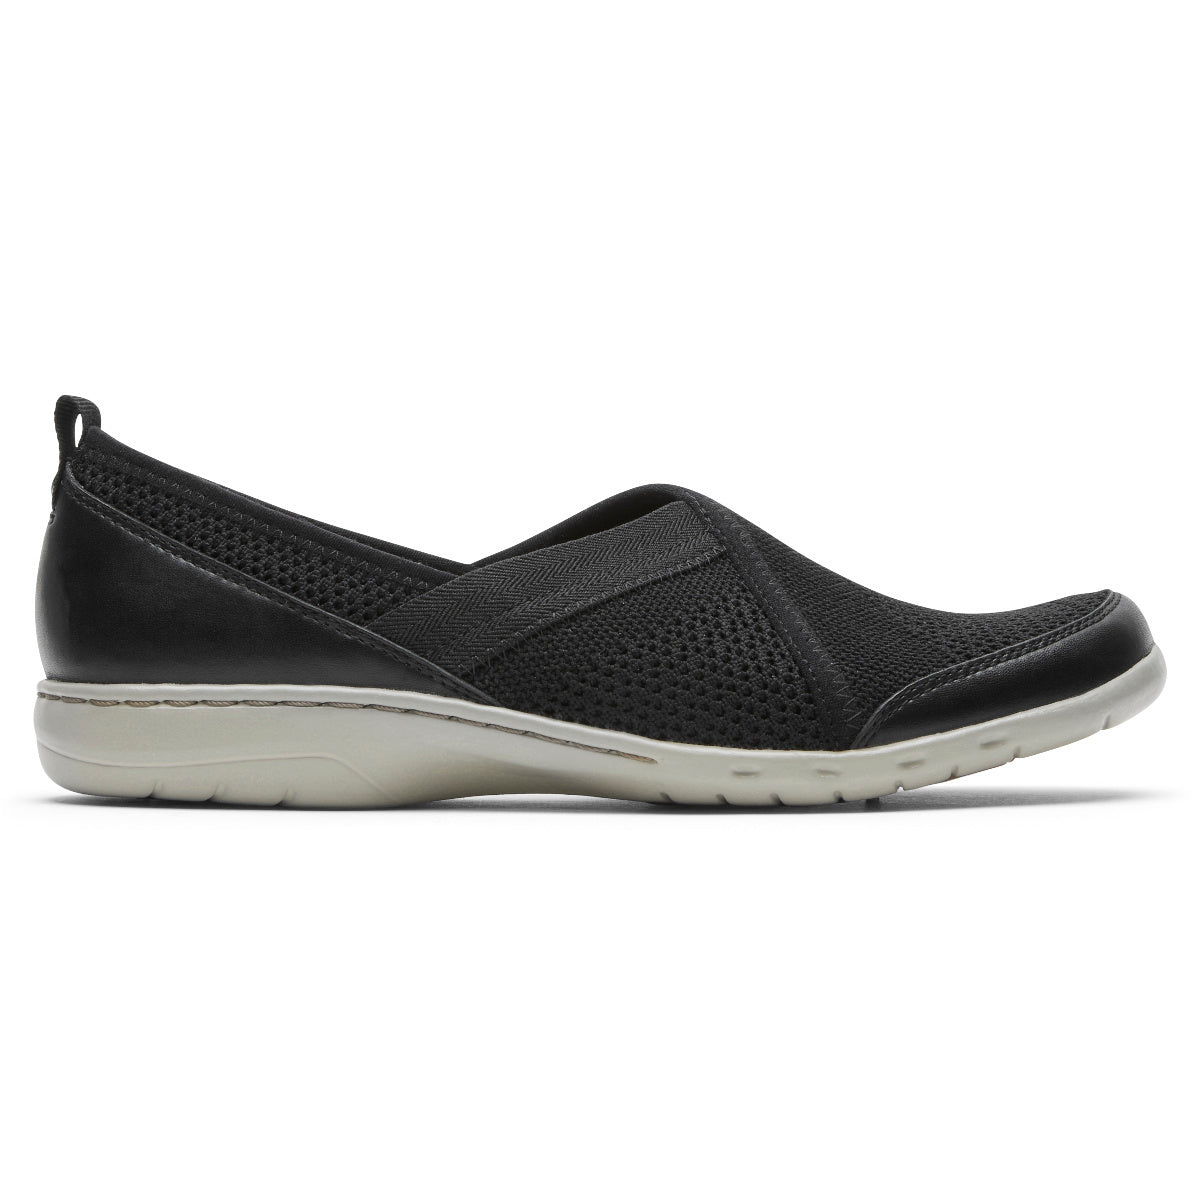 Cobb Hill Shoes and Sandals – Rockport